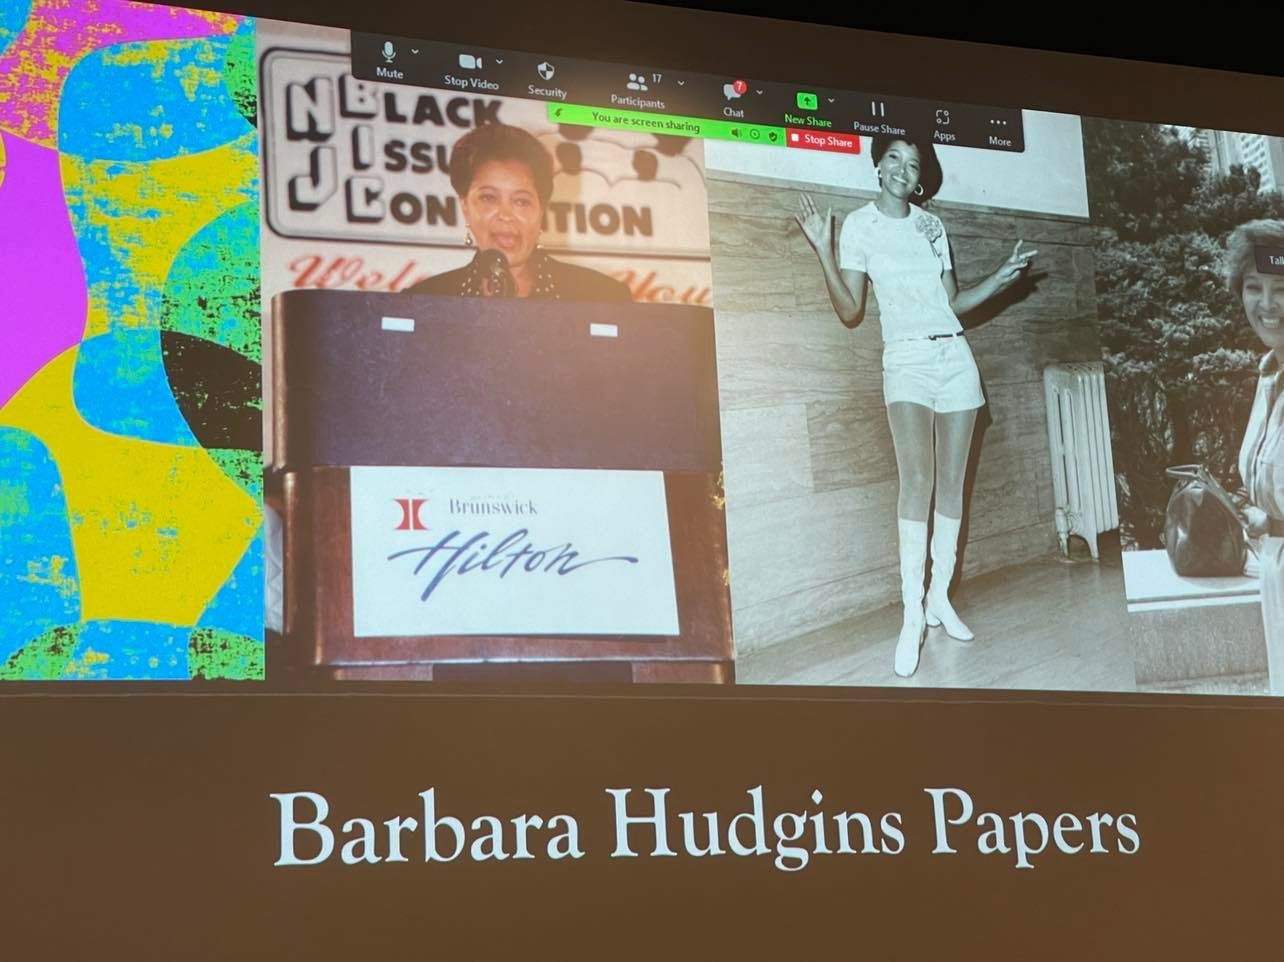 The Barbara Hudgins Papers are a unique collection accessible through City of Dreams: The Atlantic City Experience. Photo Credit: Mark Tyler